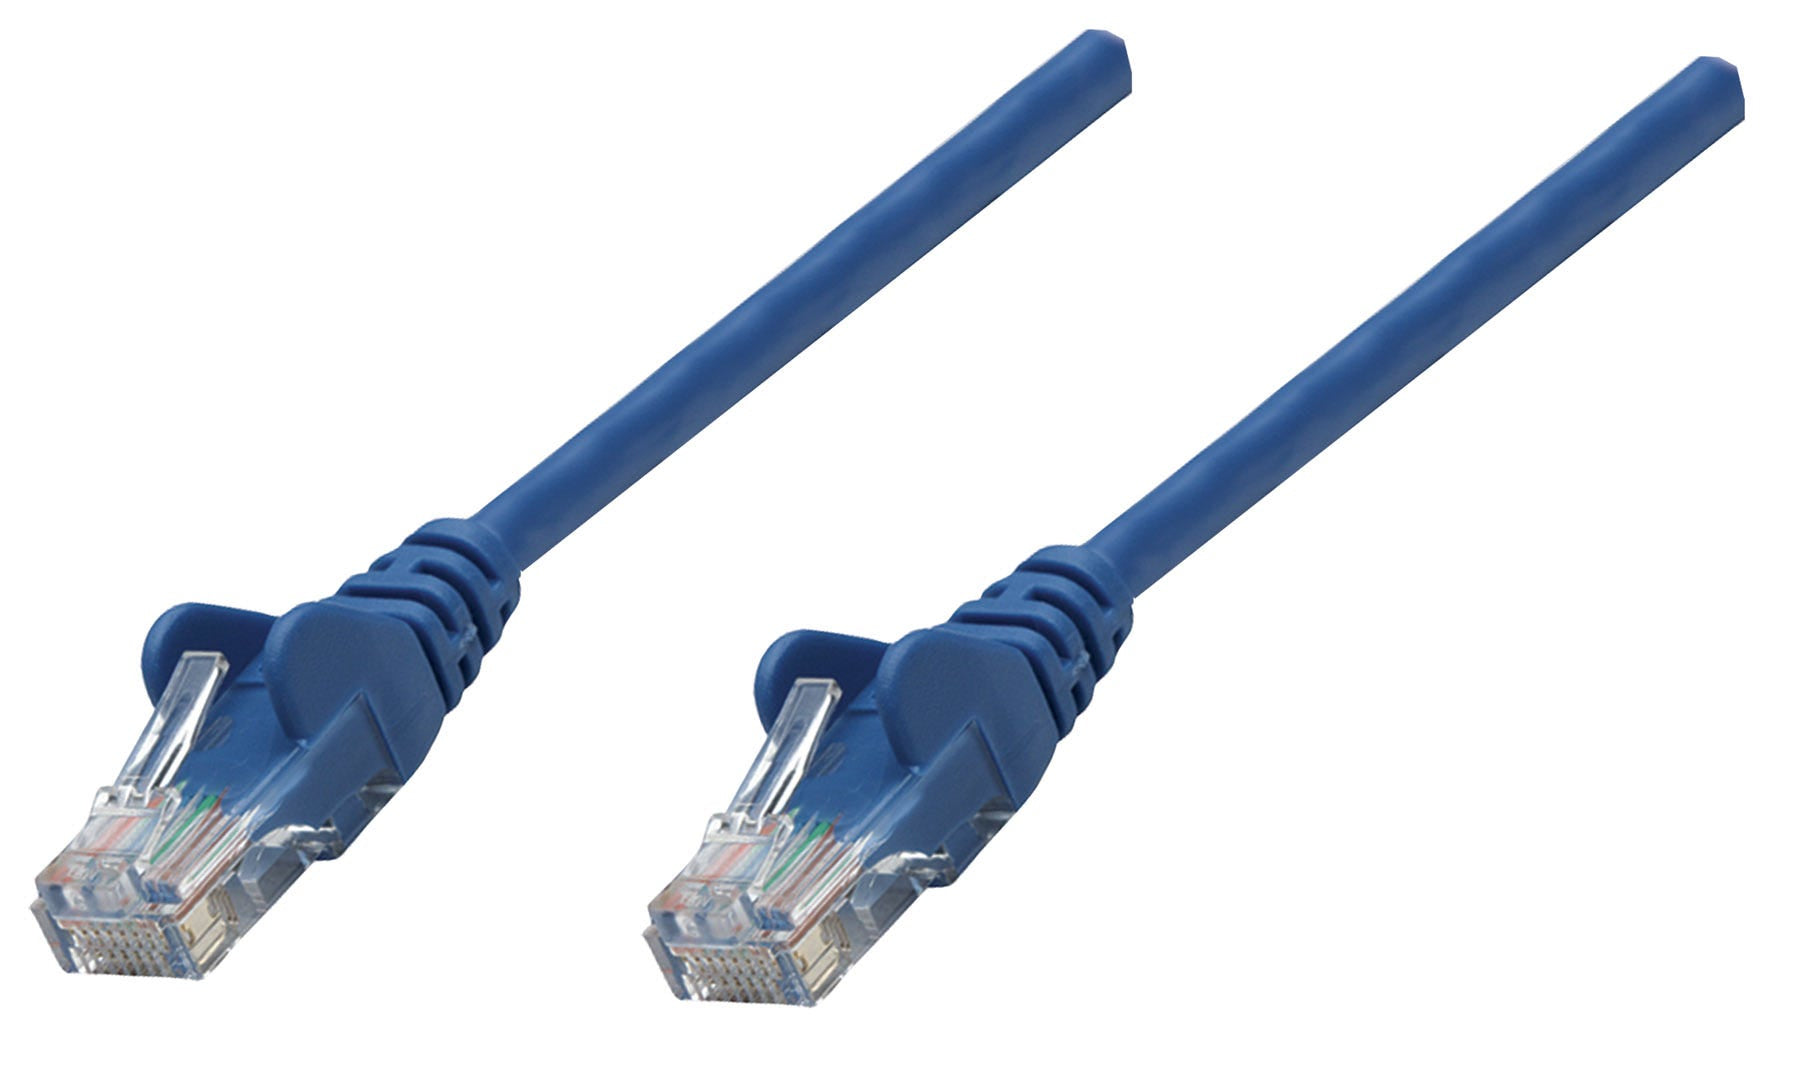 Intellinet Network Patch Cable, Cat6A, 0.25m, Blue, Copper, S/FTP, LSOH / LSZH, PVC, RJ45, Gold Plated Contacts, Snagless, Booted, Lifetime Warranty, Polybag